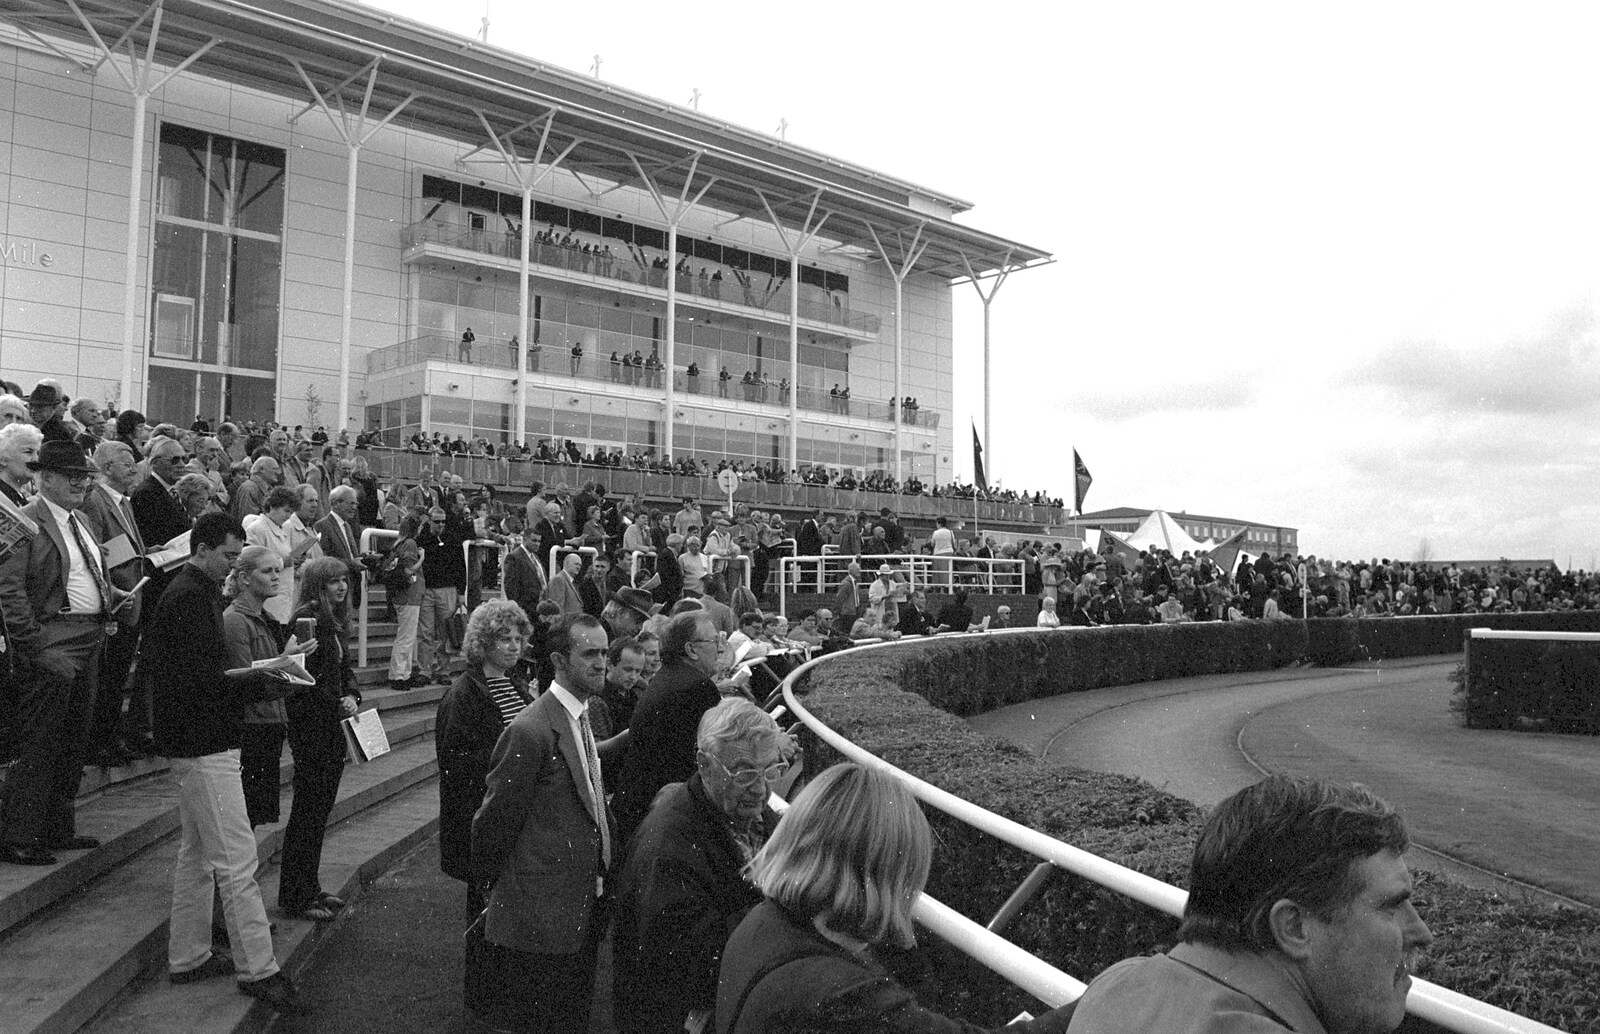 More racing crowds from 3G Lab Goes to the Races, Newmarket, Suffolk - 15th July 2001